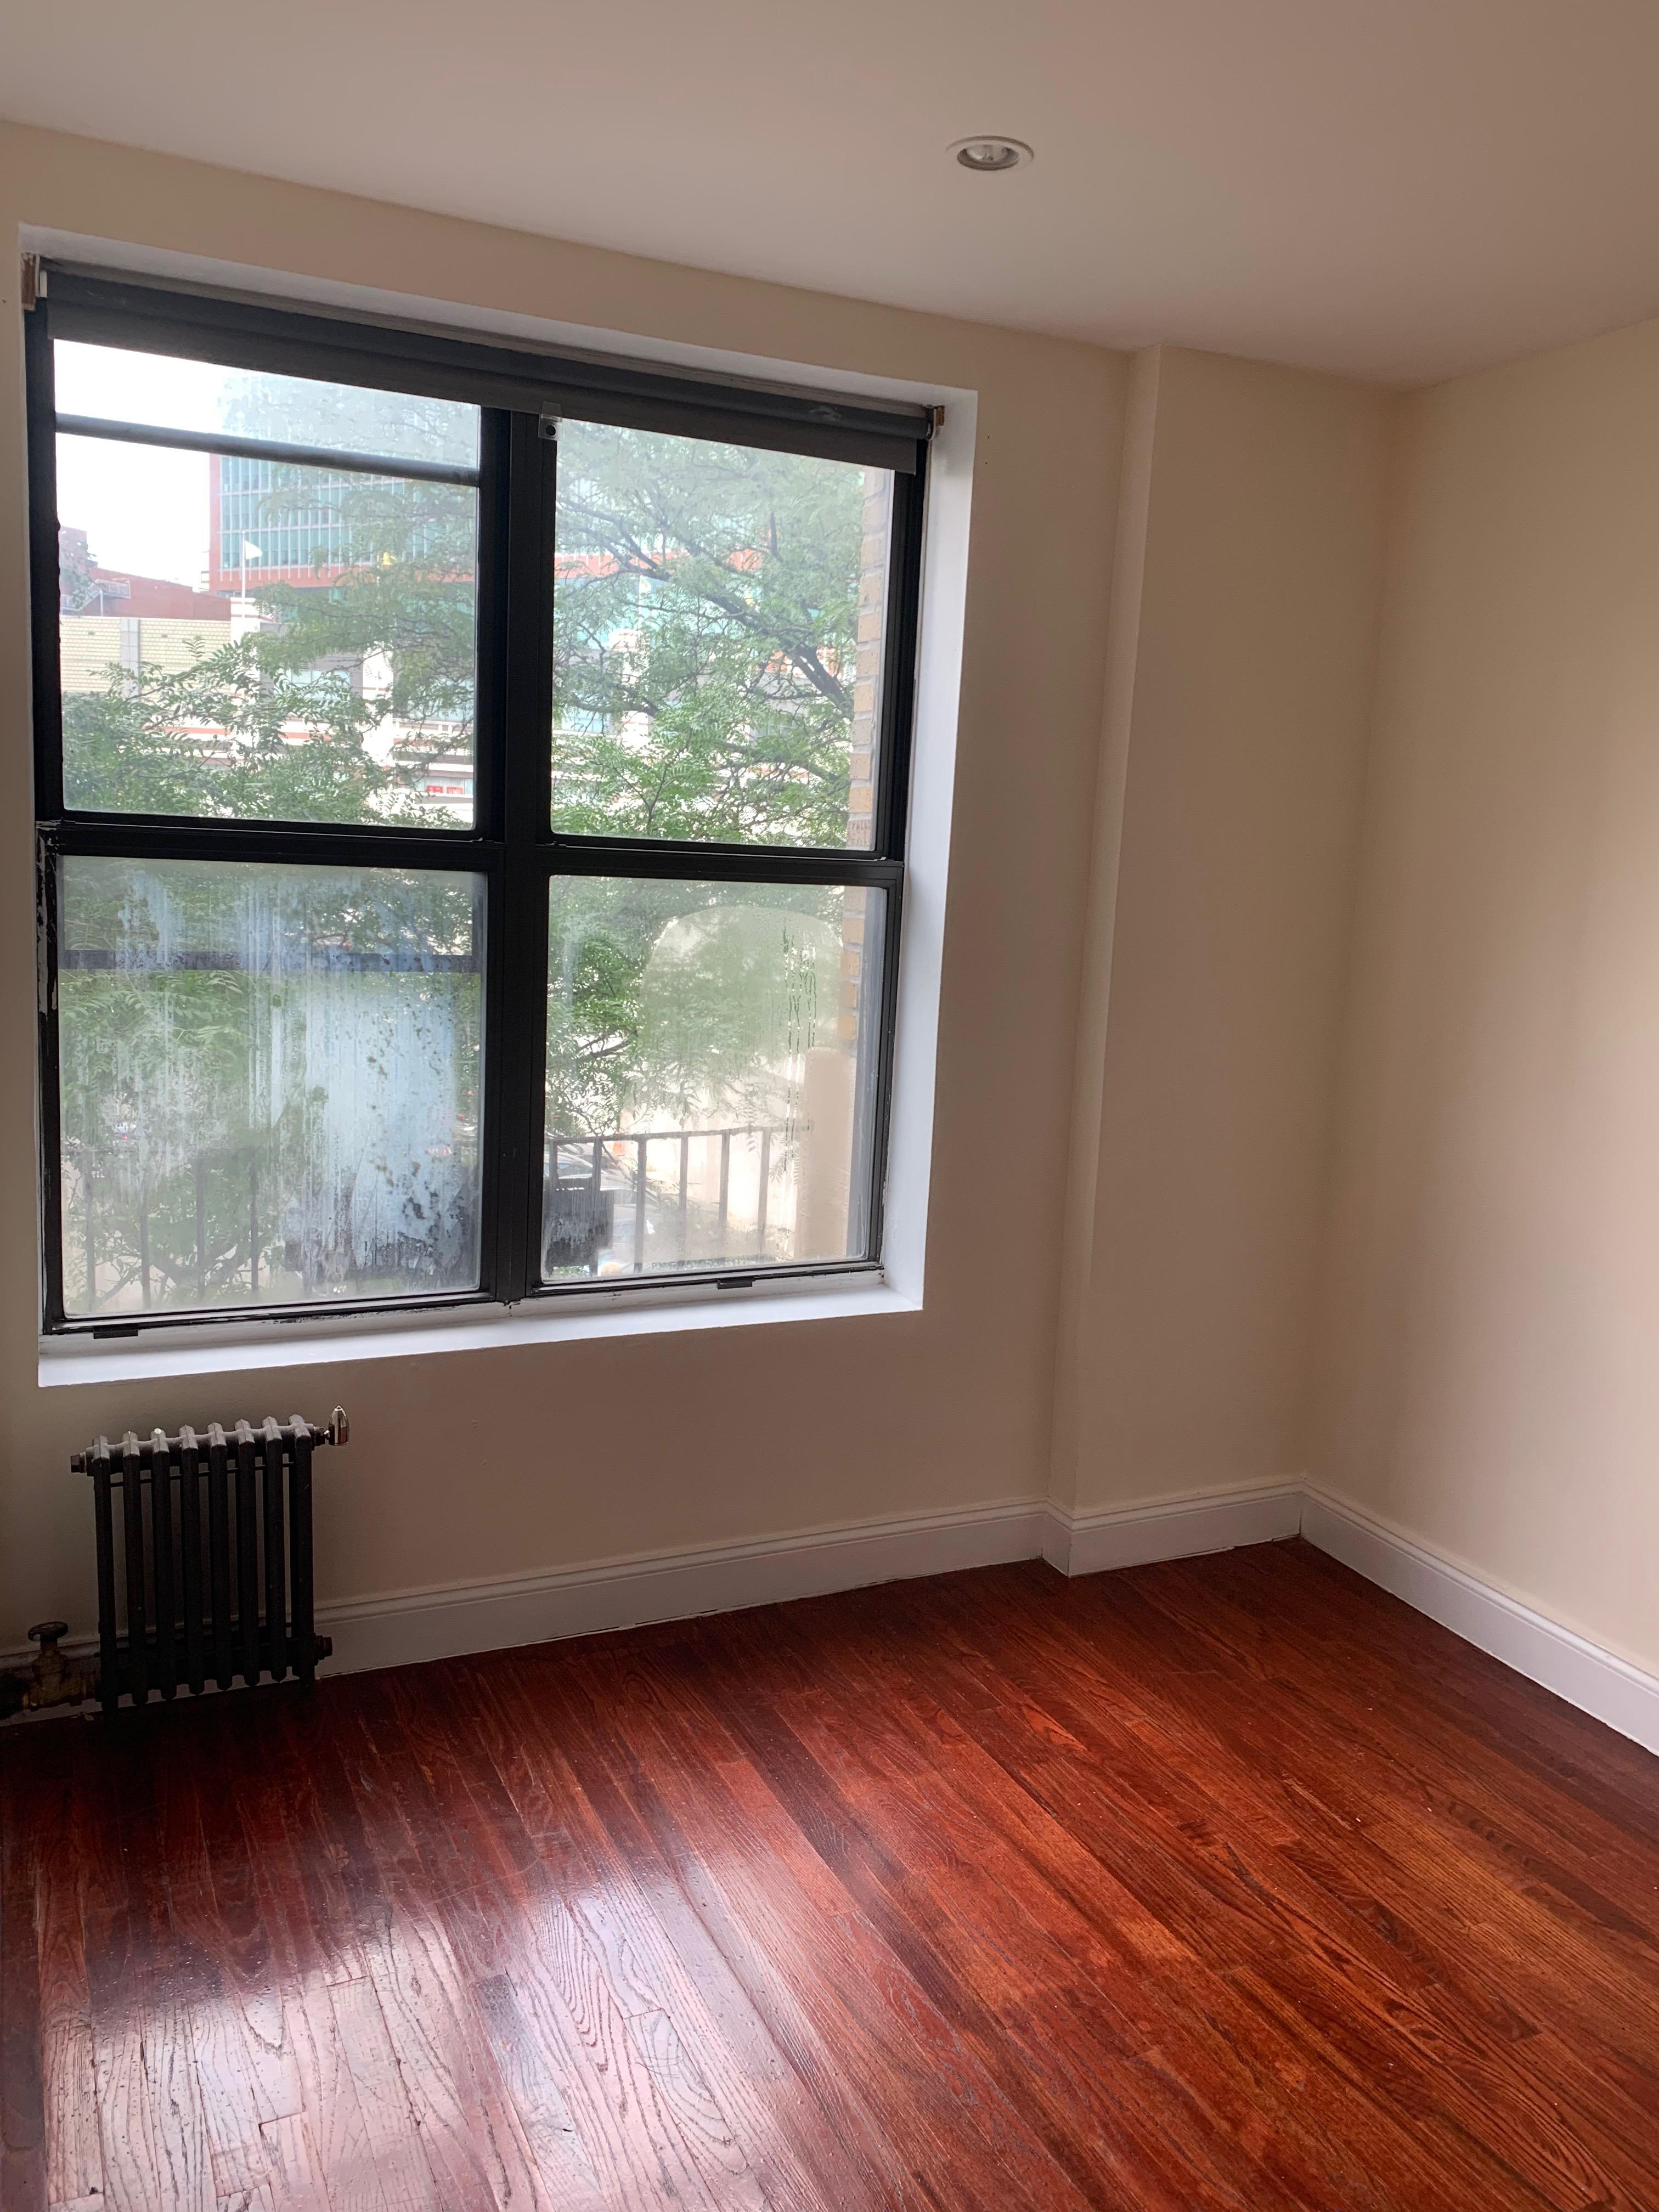 568 Pacific st, Brooklyn, NY, 2 Bedrooms Bedrooms, 4 Rooms Rooms,1 BathroomBathrooms,Apartment,For Rent,Pacific st,3,1224